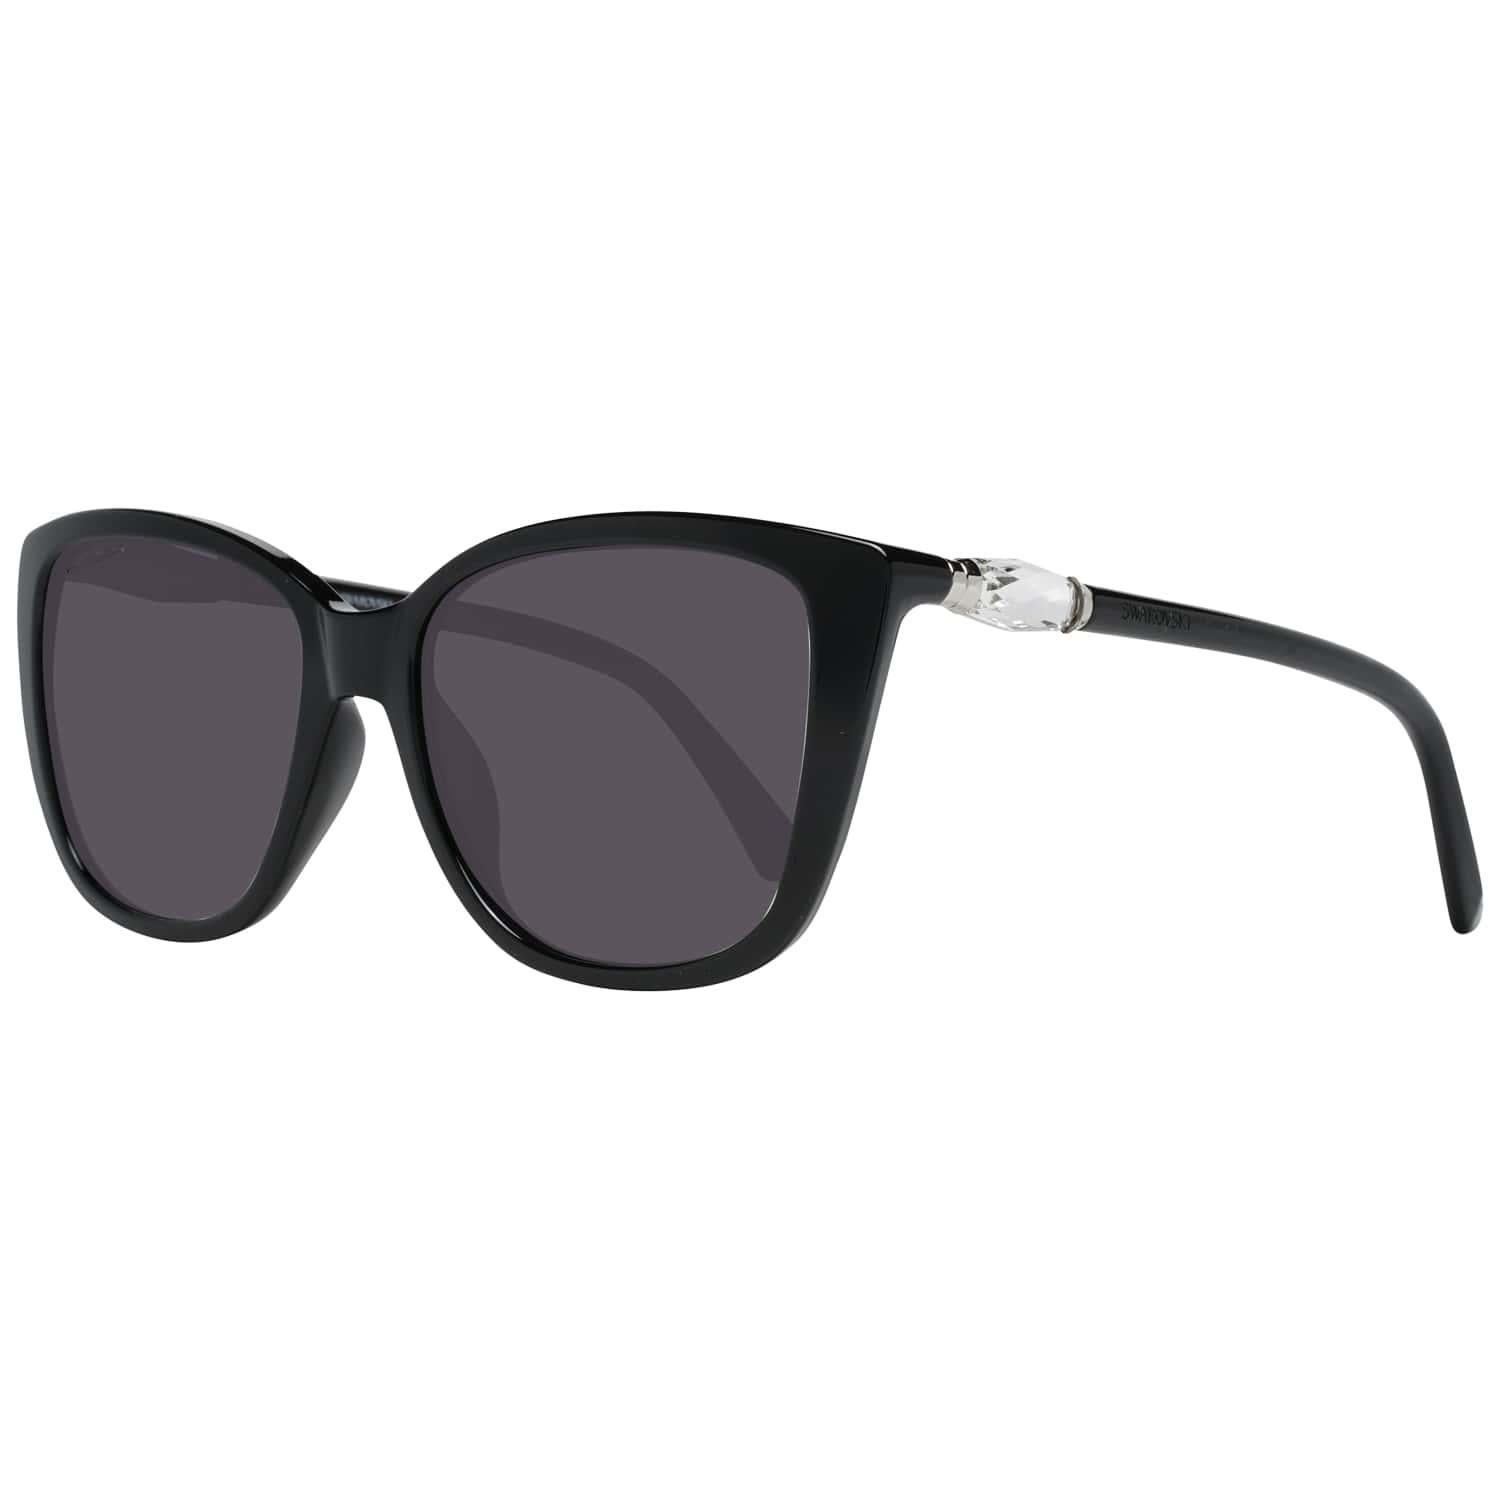 DetailsMATERIAL: AcetateCOLOR: BlackMODEL: SK0234-H 5401BGENDER: WomenCOUNTRY OF MANUFACTURE: ChinaTYPE: SunglassesORIGINAL CASE?: YesSTYLE: ButterflyOCCASION: CasualFEATURES: LightweightLENS COLOR: GreyLENS TECHNOLOGY: GradientYEAR MANUFACTURED: